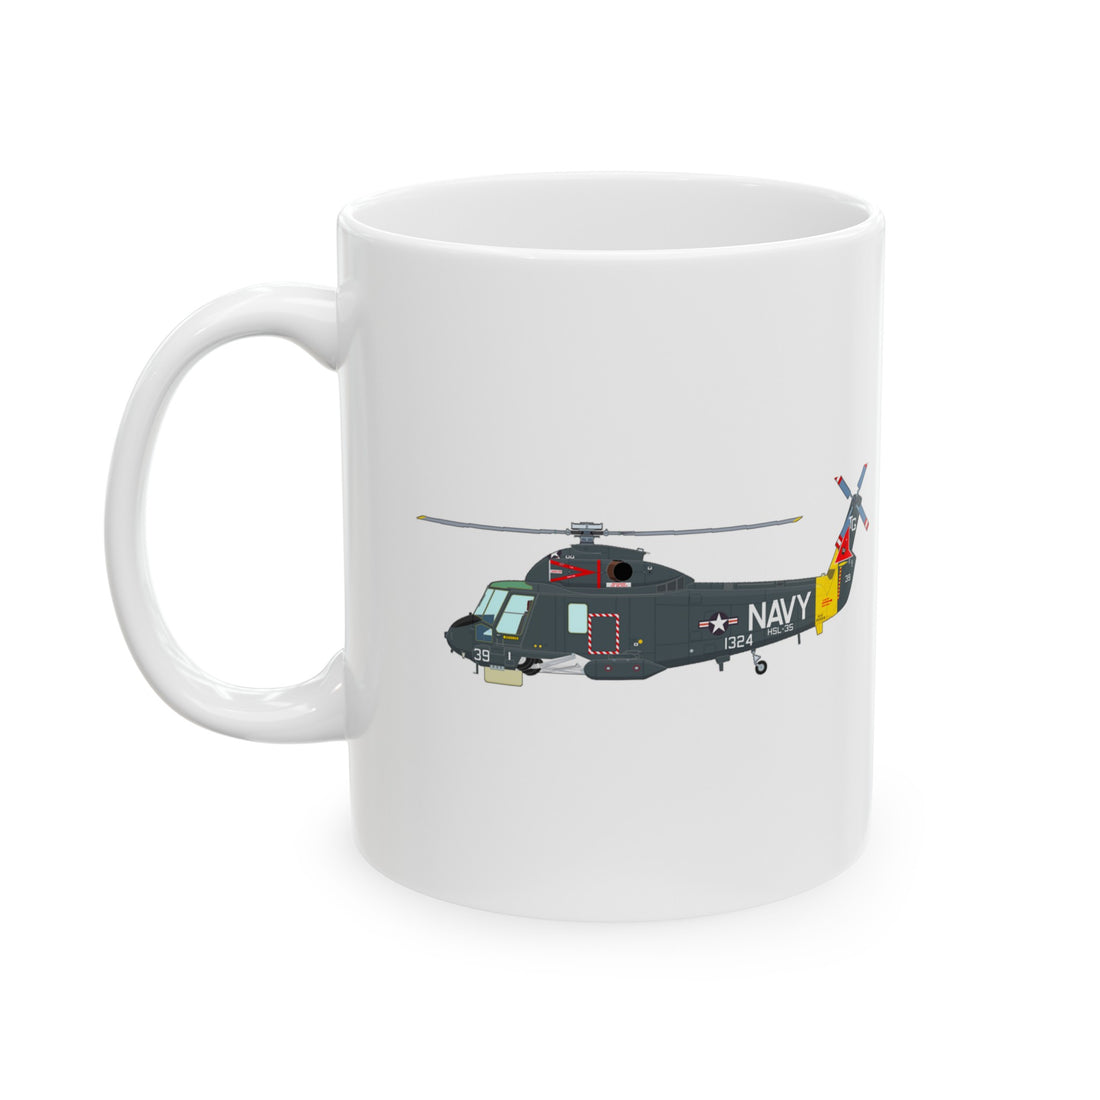 HSL-35 "Magicians" Squadron Logo and SH-2 Profile Coffee Mug, Navy Helicopter ASW Squadron flying the SH-2 Seasprite